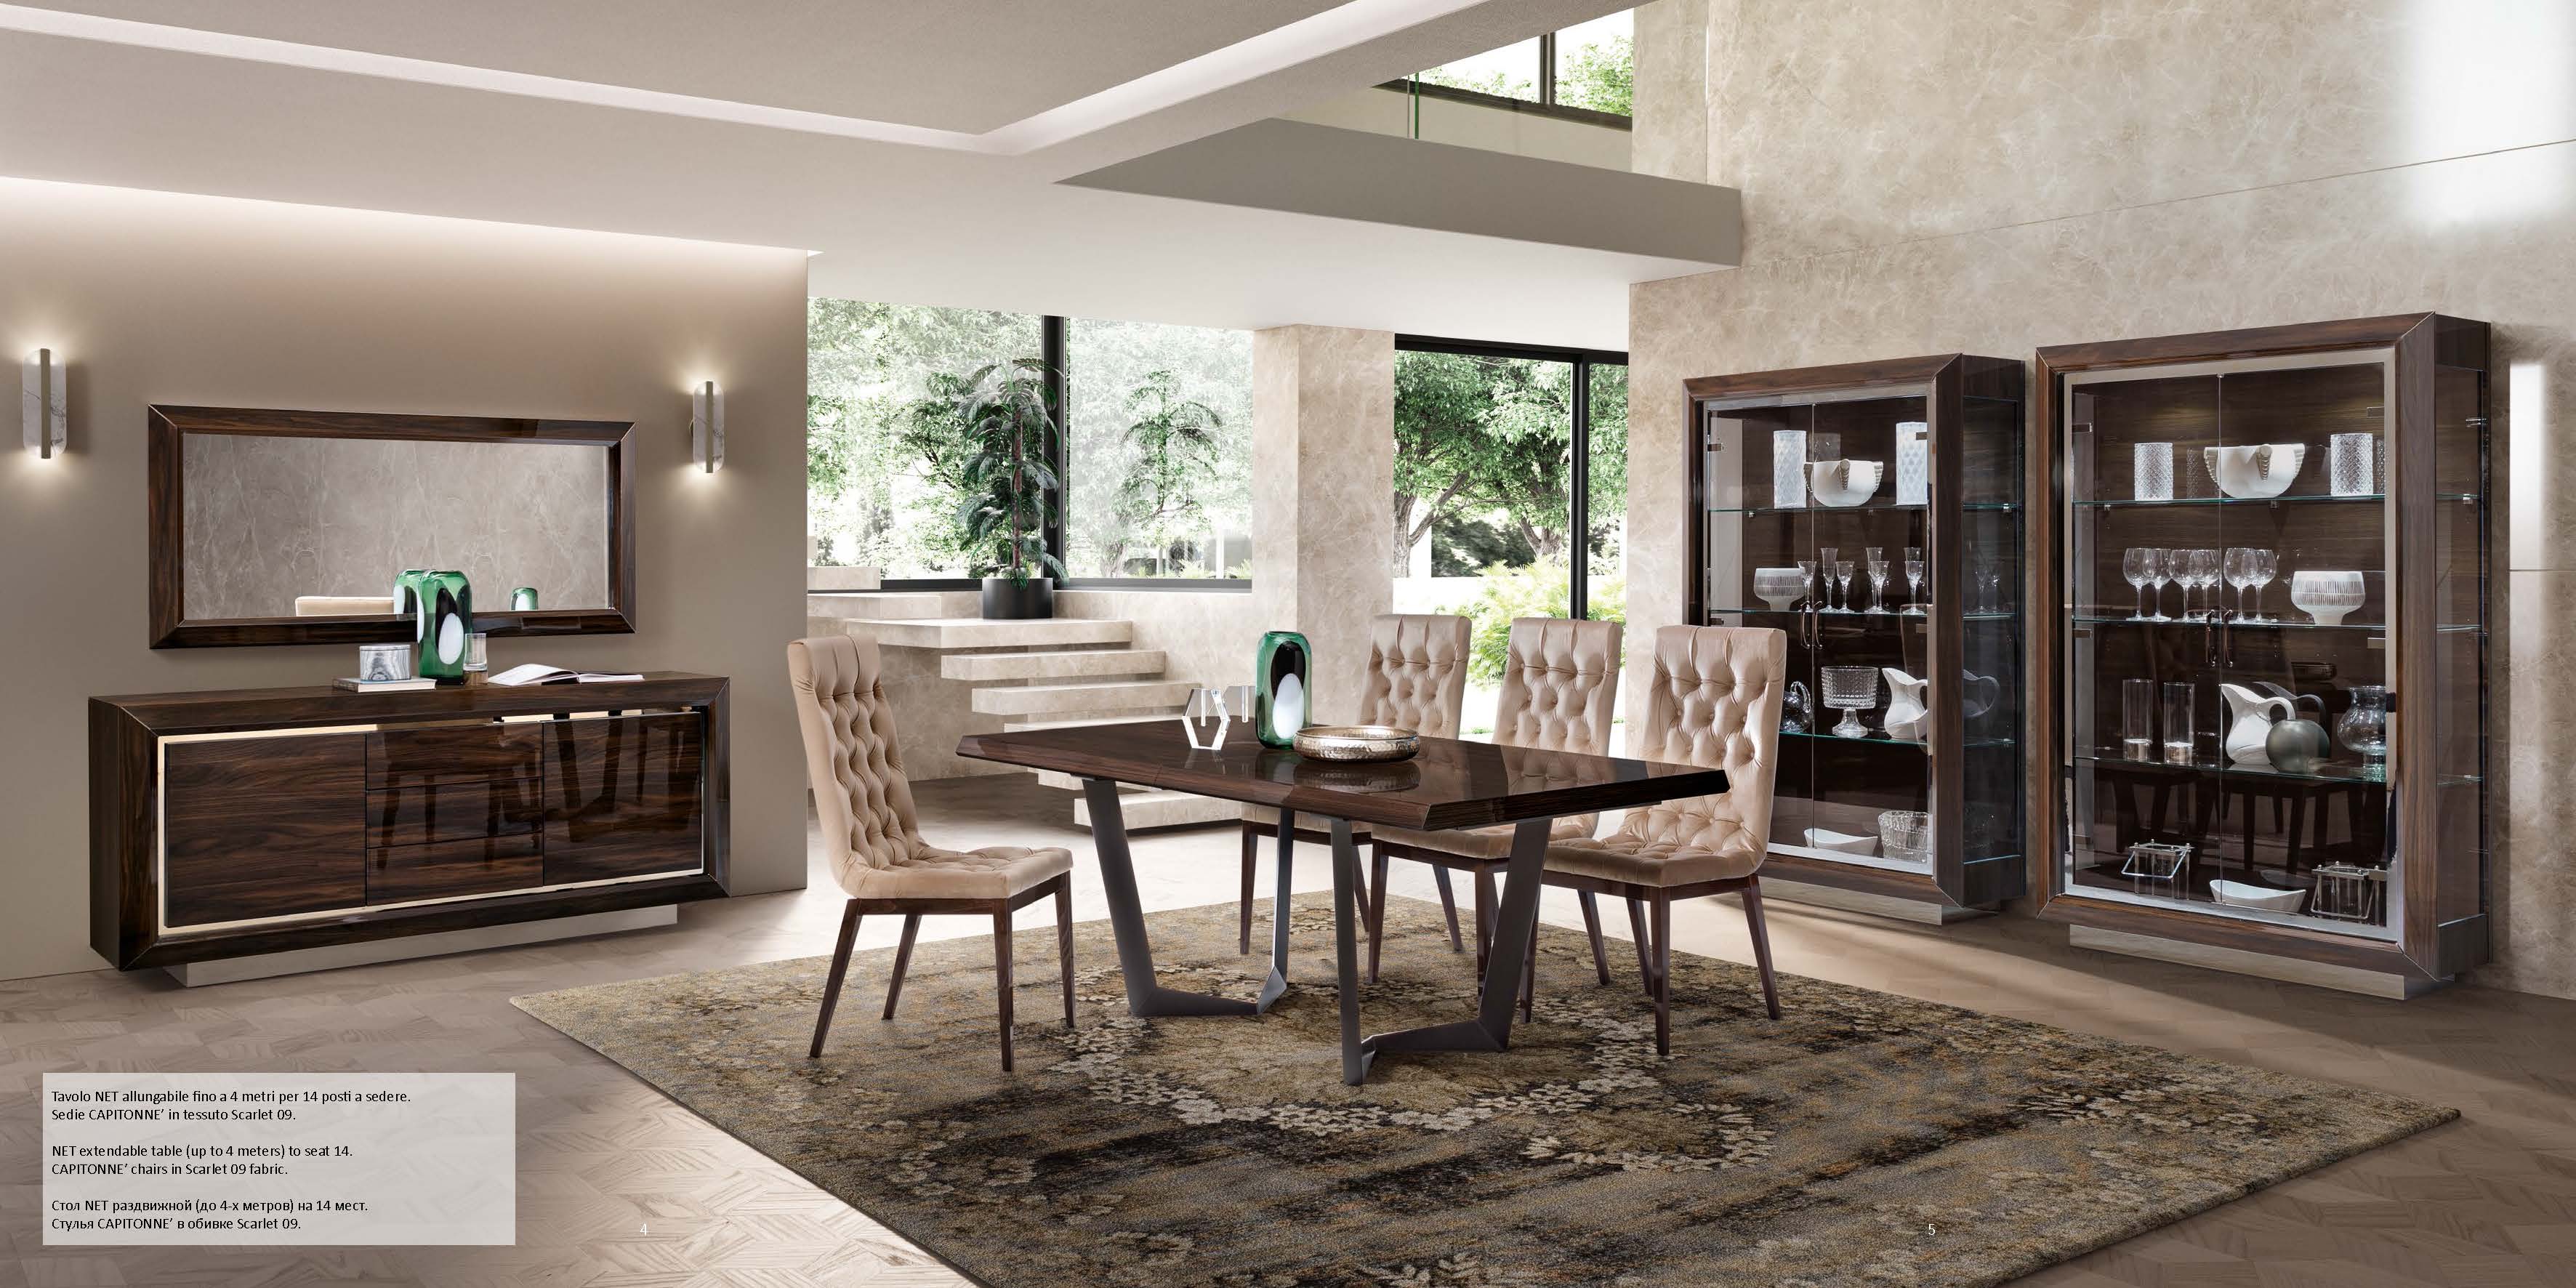 Wallunits Hallway Console tables and Mirrors Elite Day Walnut Dining Additional items